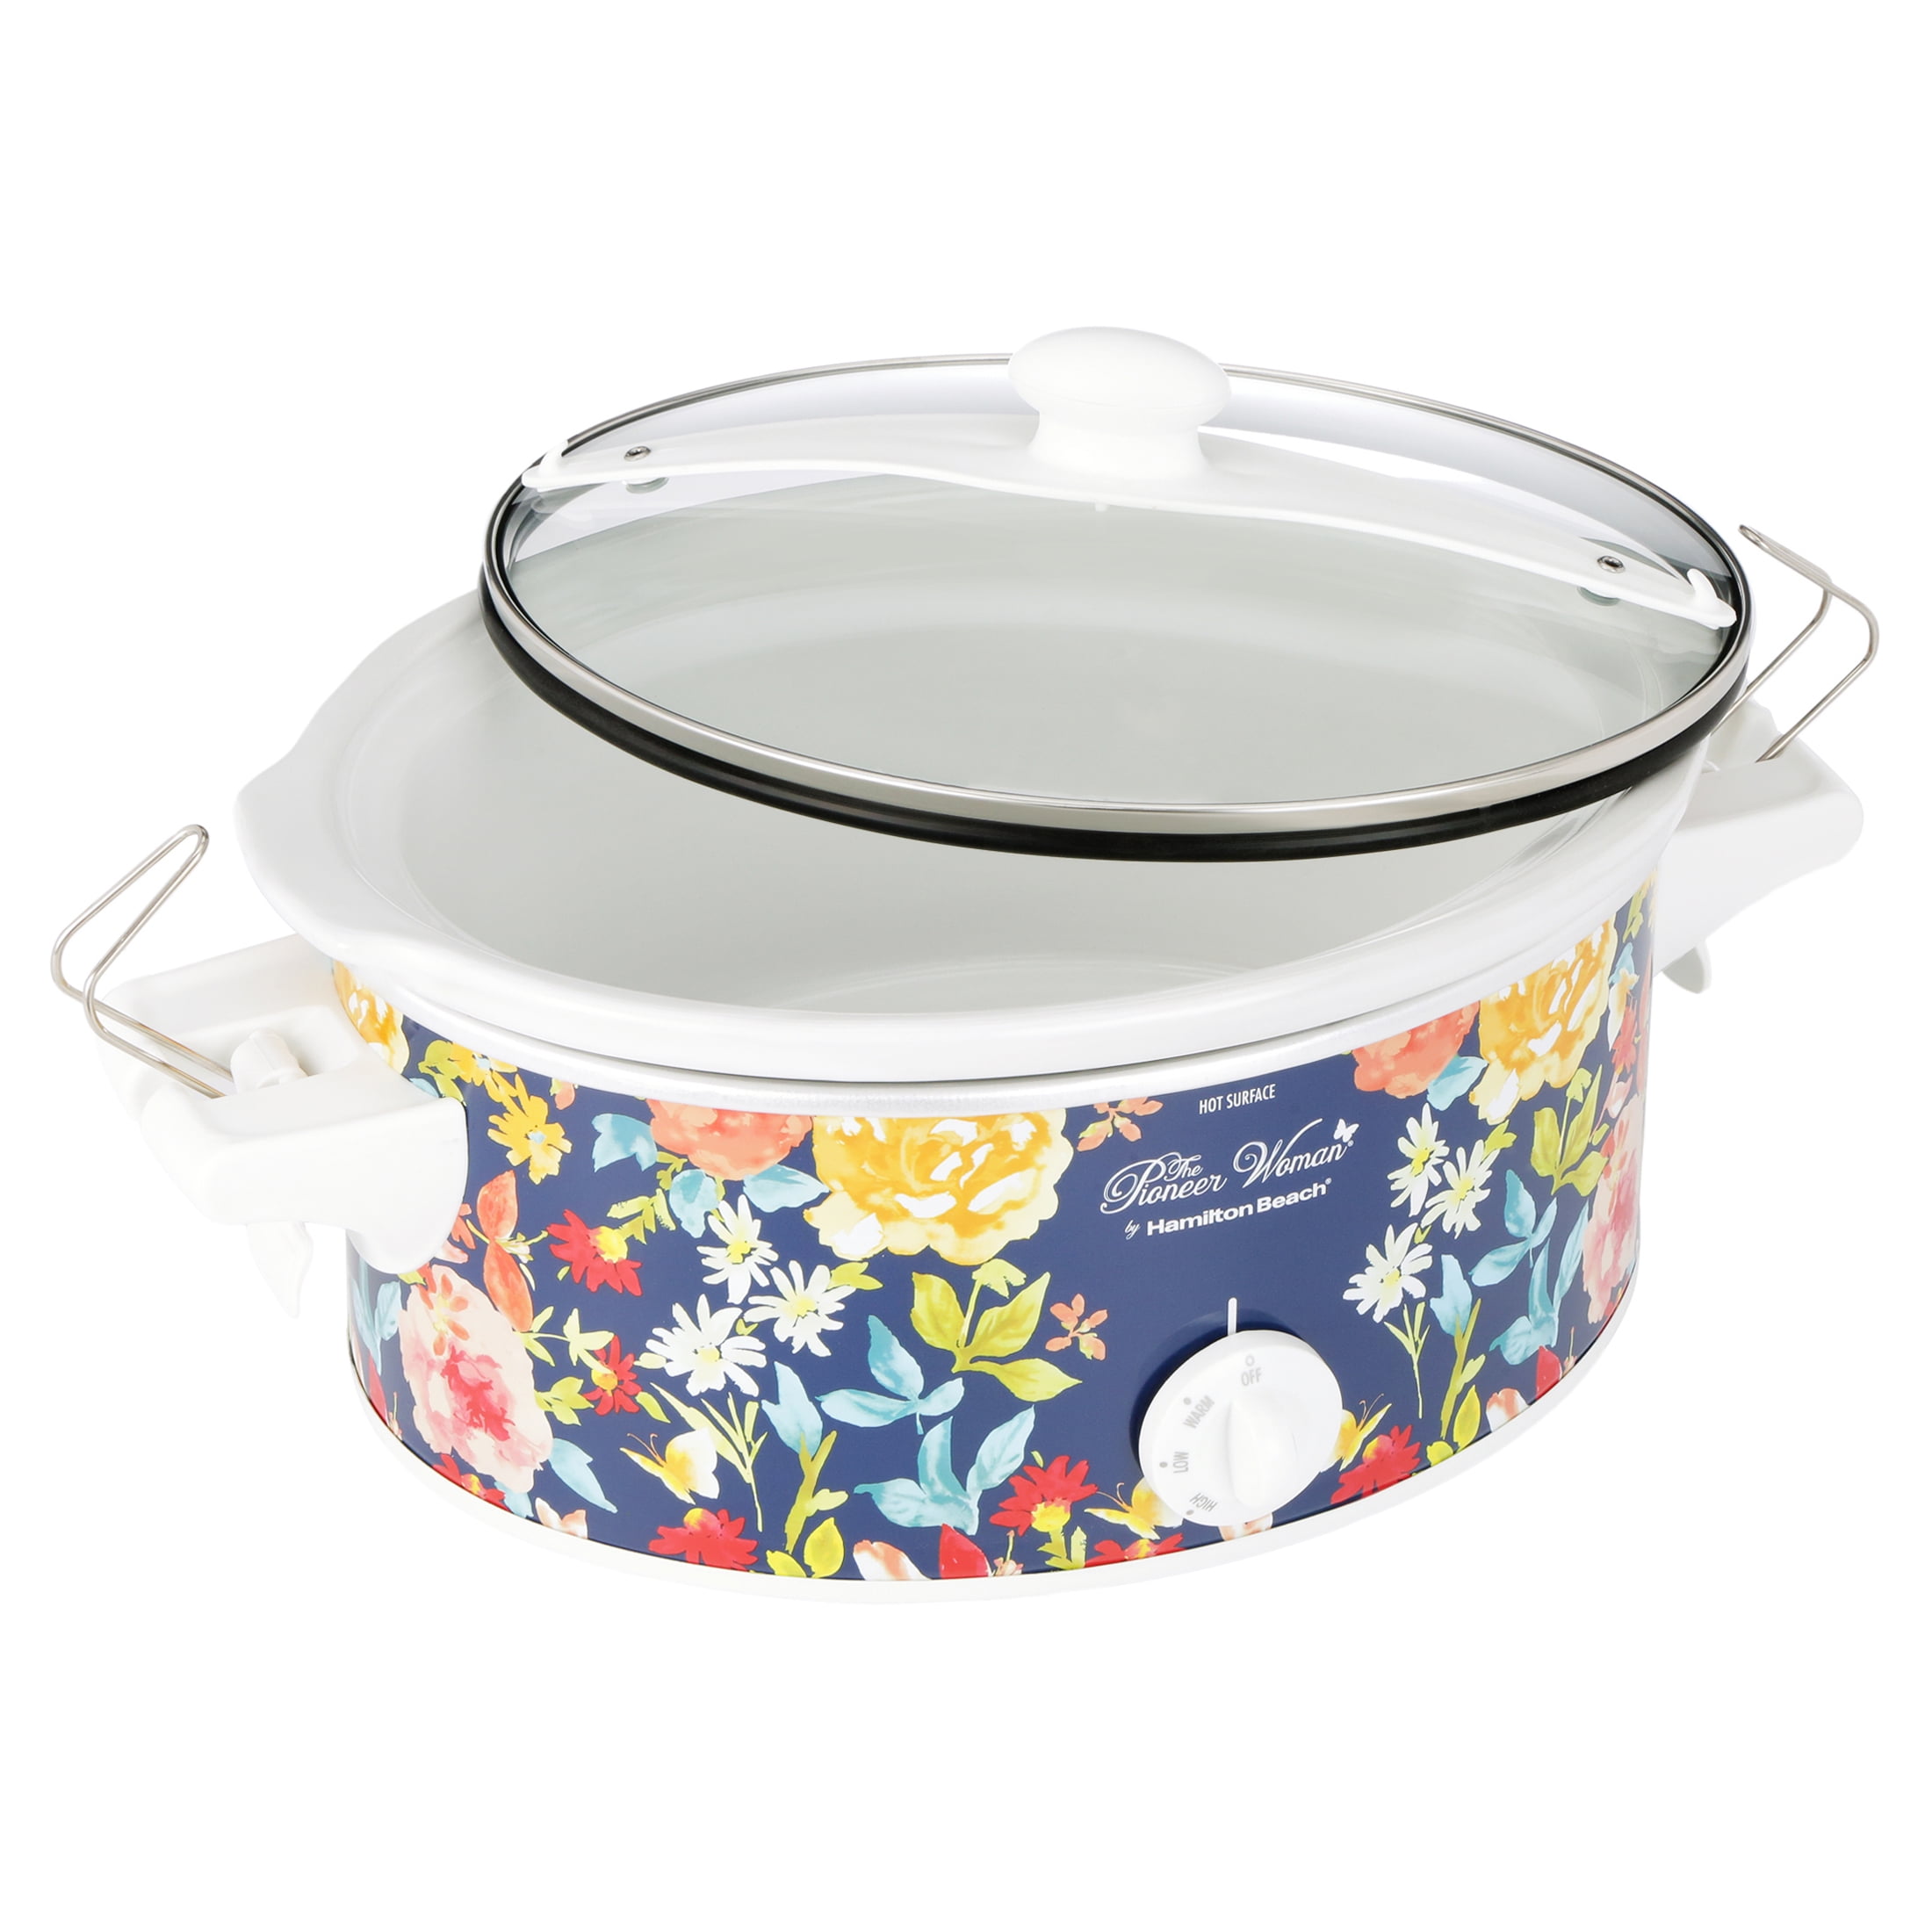 Pioneer Woman Portable Slow Cooker Fiona Floral, 5 Quart